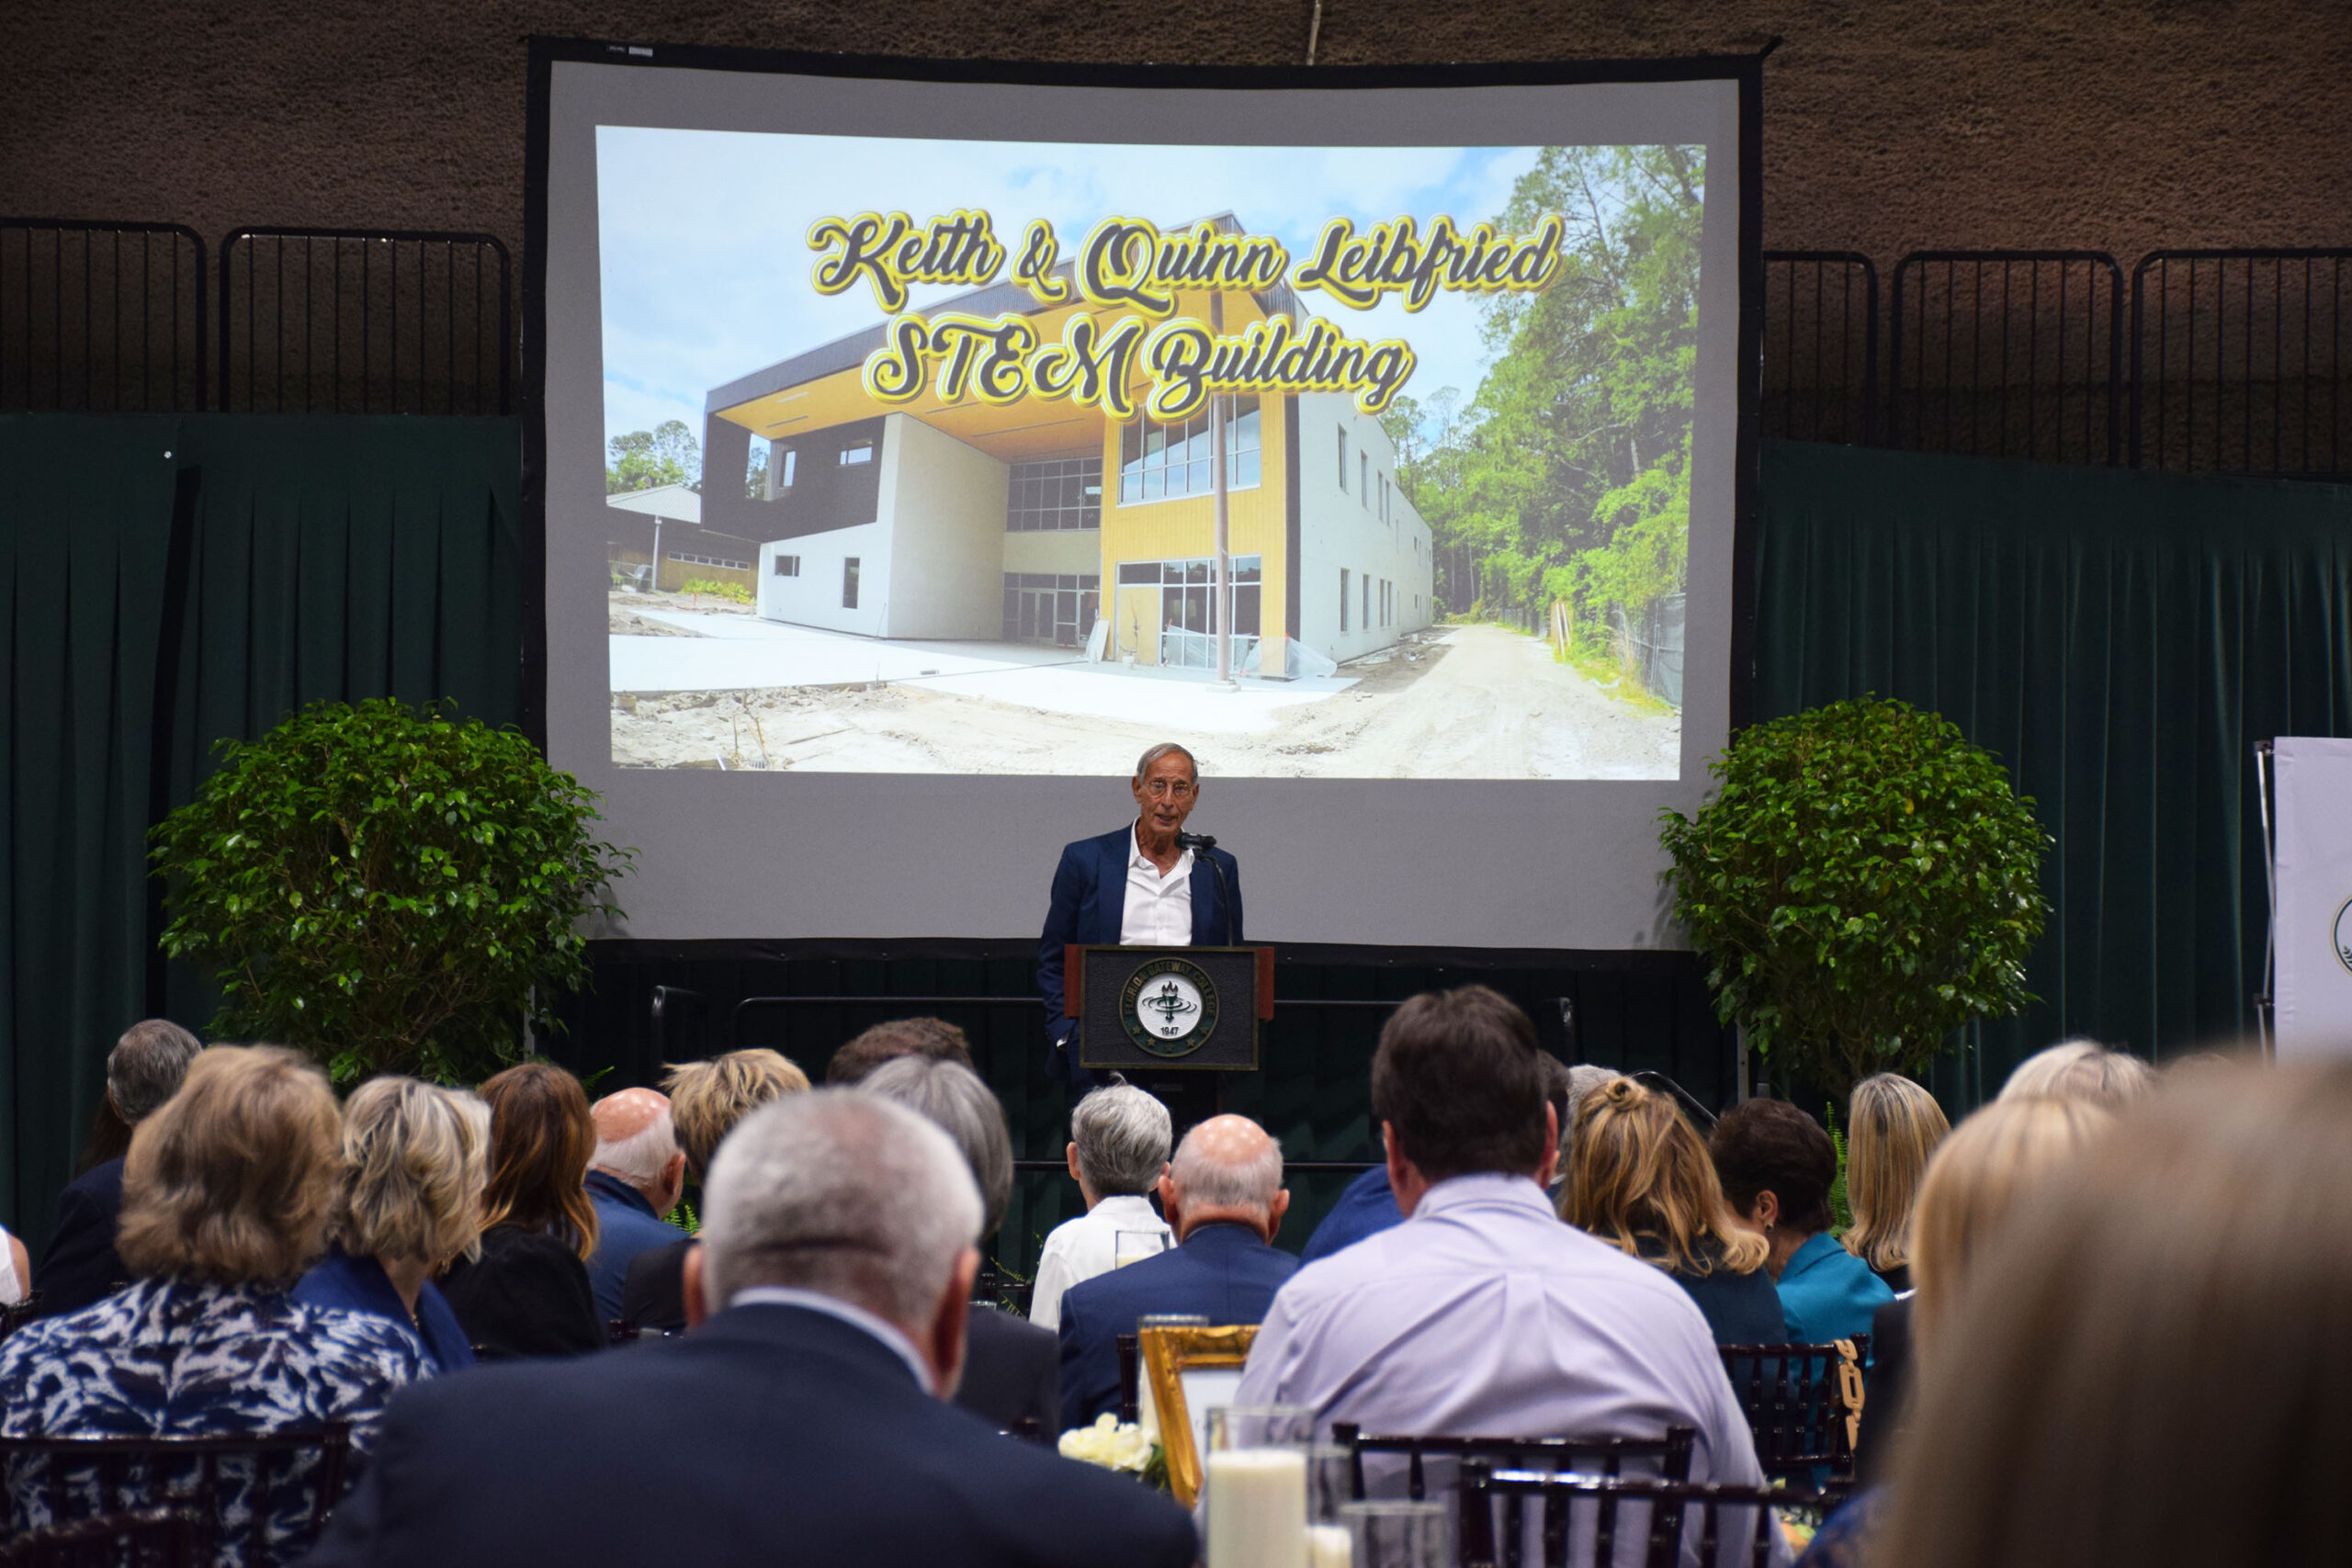 Florida Gateway College Names Building after Keith & Quinn Leibfried